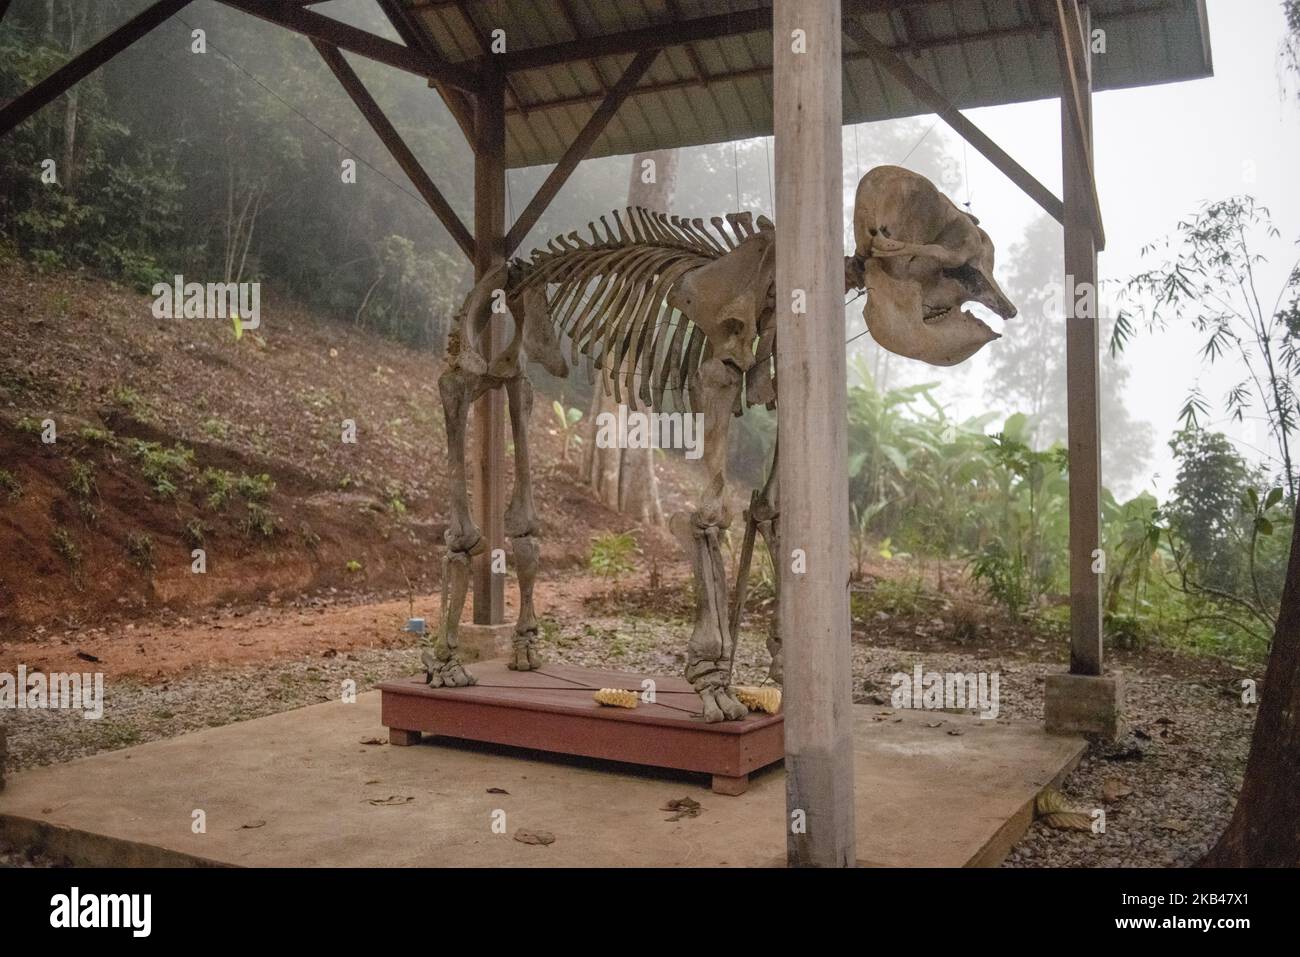 The skeleton of an elephant near the hospital in the Elephant Conservation Center, Sayaboury, Laos, in December 2018. Laos was known as ‘The land of a million elephants’ in the past, today the elephant population in the country stands at around 800 individuals. Half of them is made up of captive elephants, and their number is in decline; the owners are not interested in breeding animals (the cow needs at least four years out of work during her pregnancy and lactation), illegal trafficking to China and other neighboring countries continues. Against this backdrop, the Elephant Conservation Cente Stock Photo